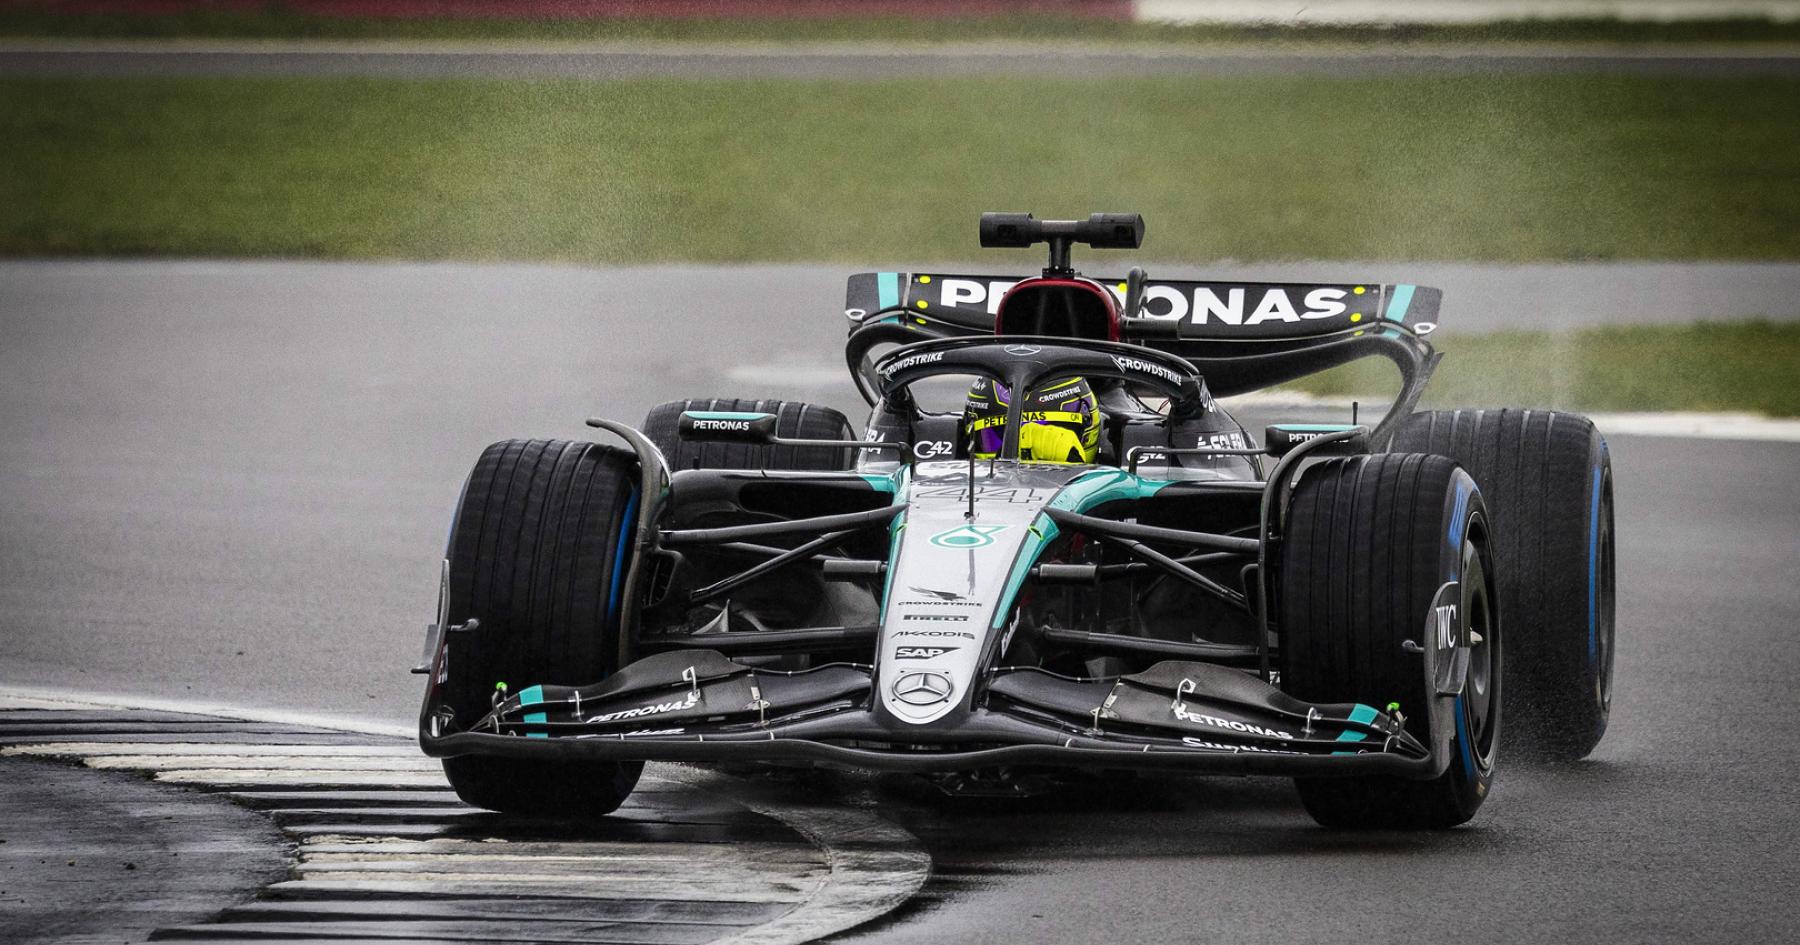 Mercedes stun ex-F1 driver with “very bold moves”